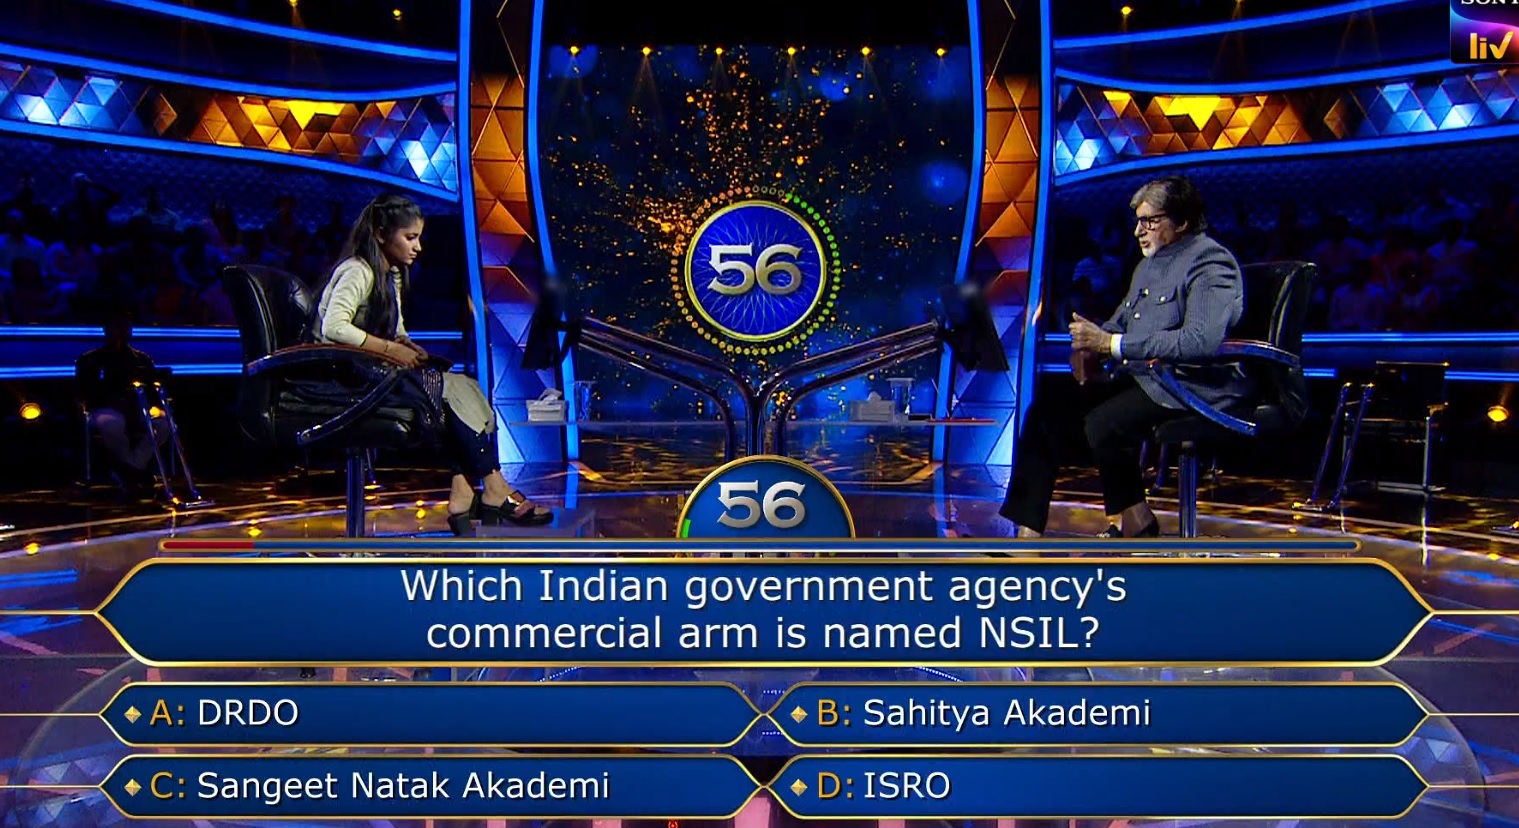 Ques : Which Indian government agency’s commercial arm is named NSIL?